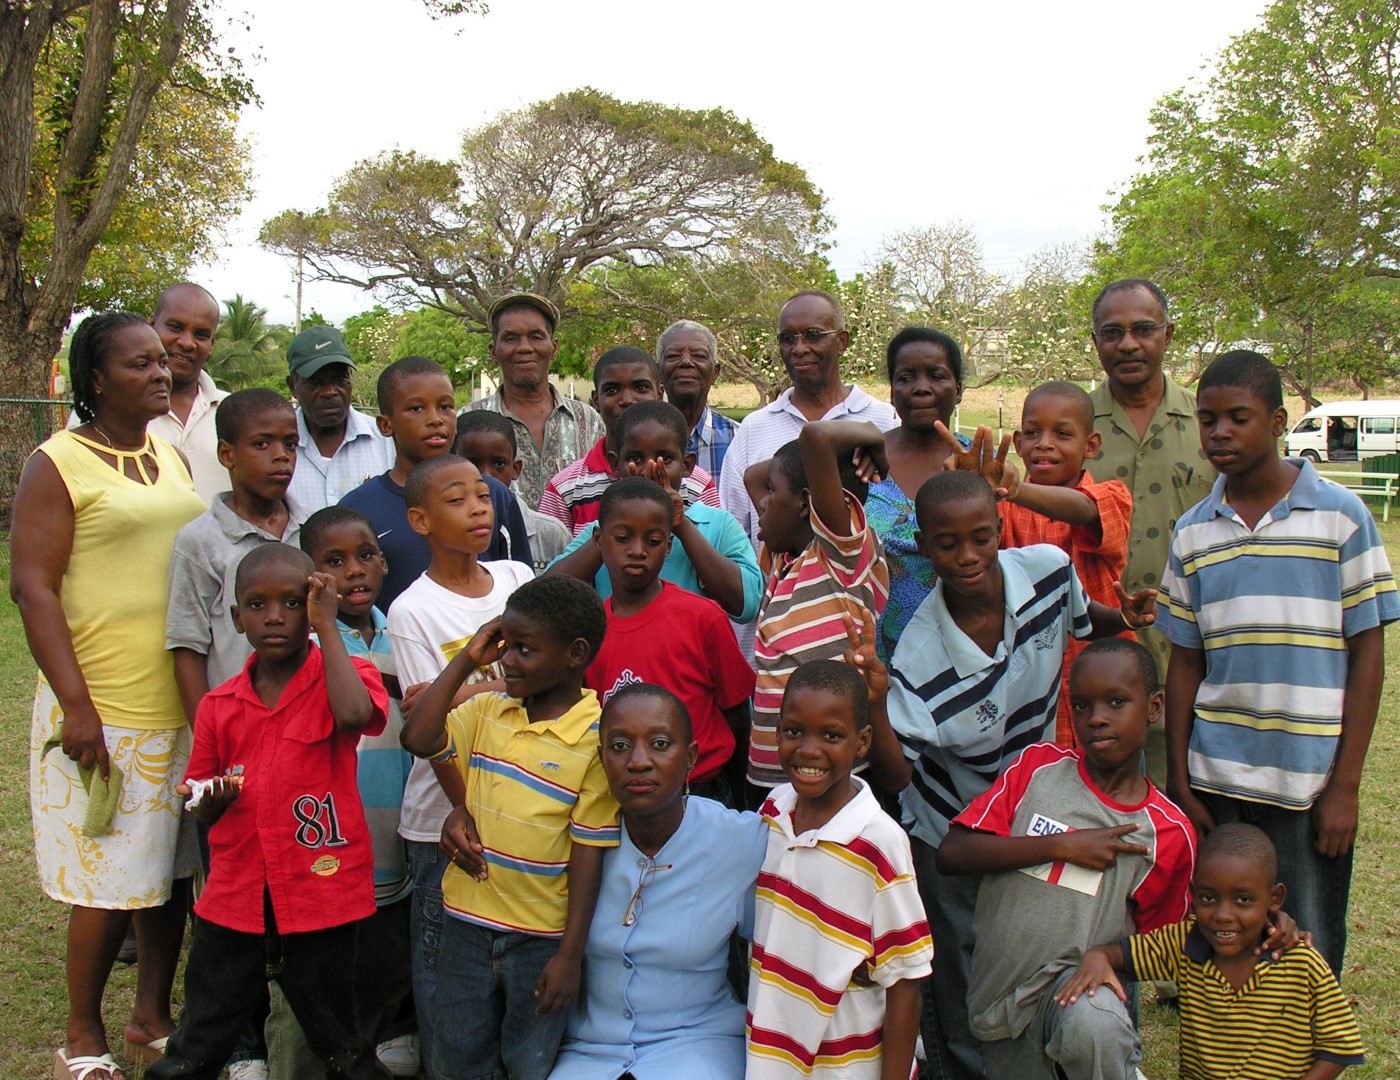 Men's Fellowship at picnic with children